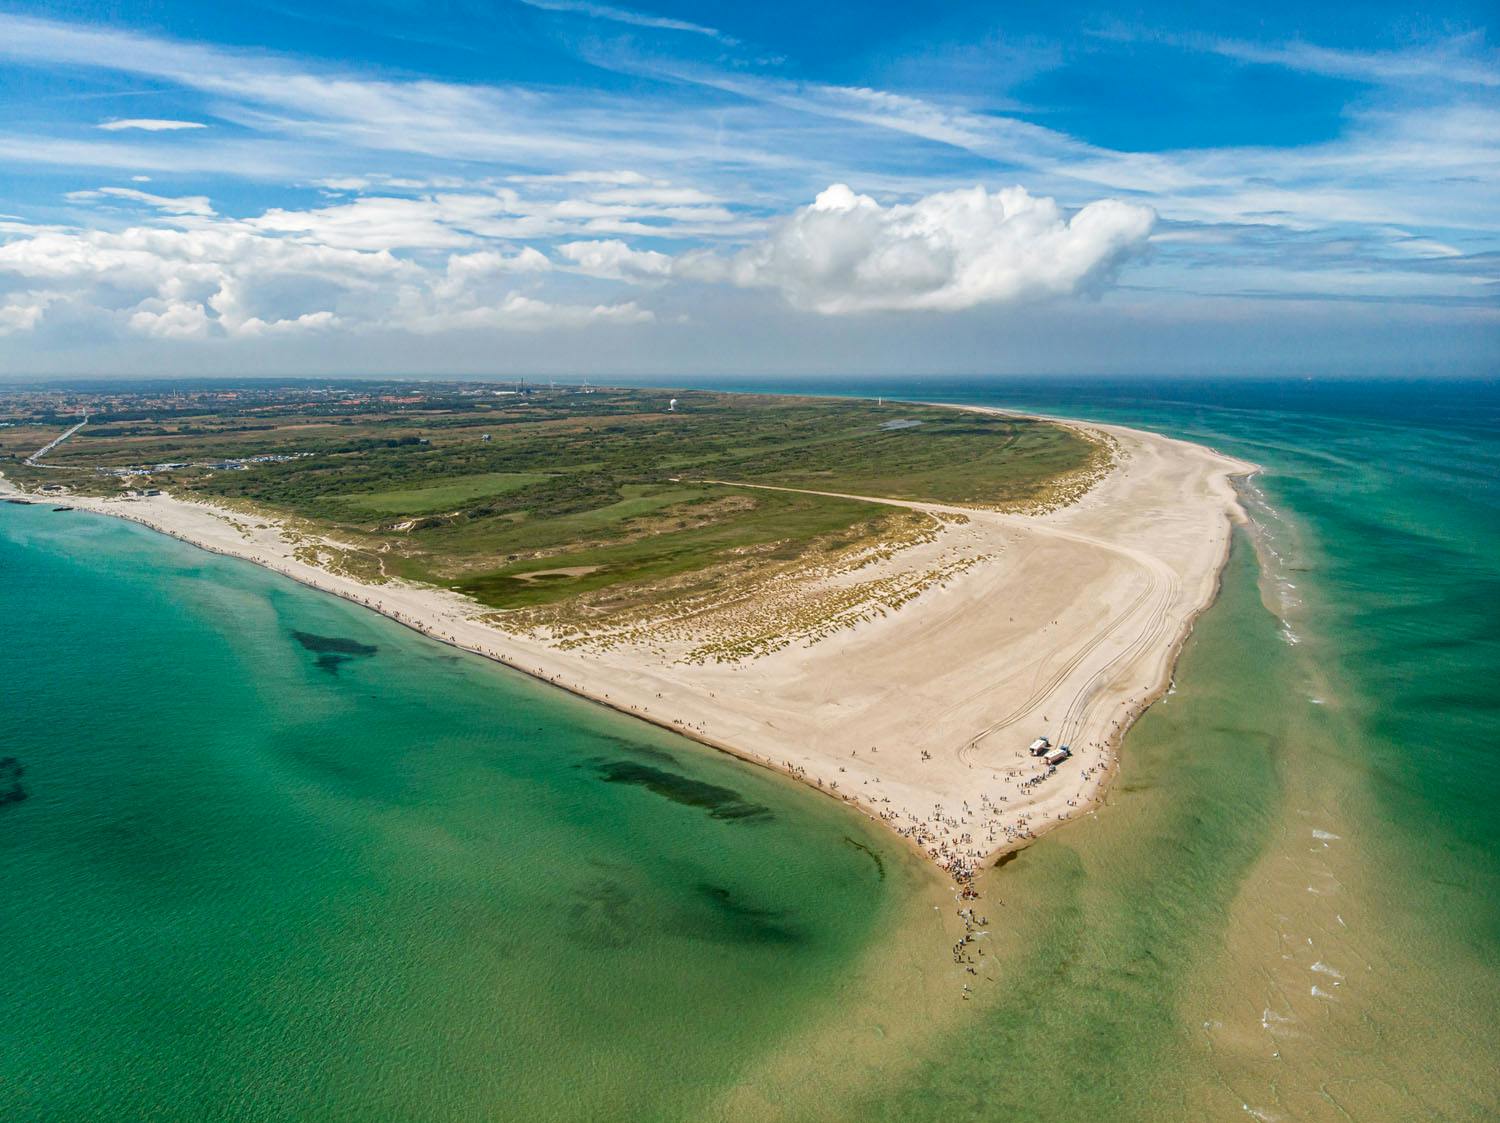 Skagen - The northernmost tip of Denmark where oceans converge